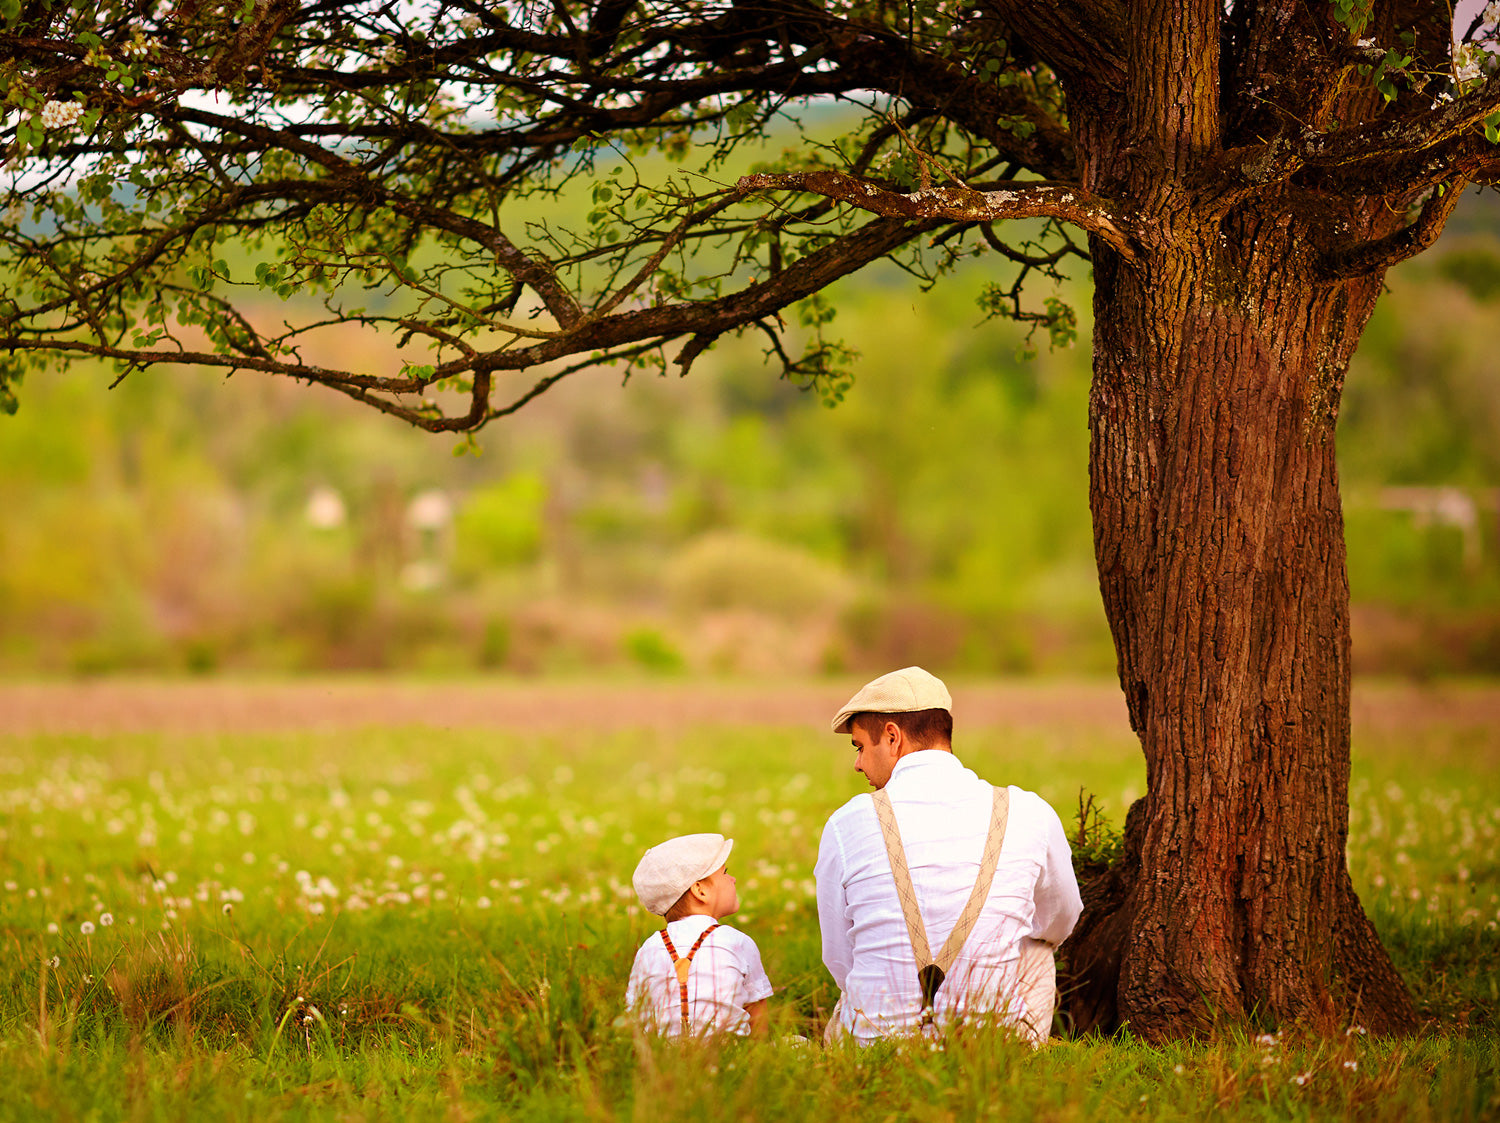 Son sits with father under large deciduous tree. Both can be seen from behind and are talking